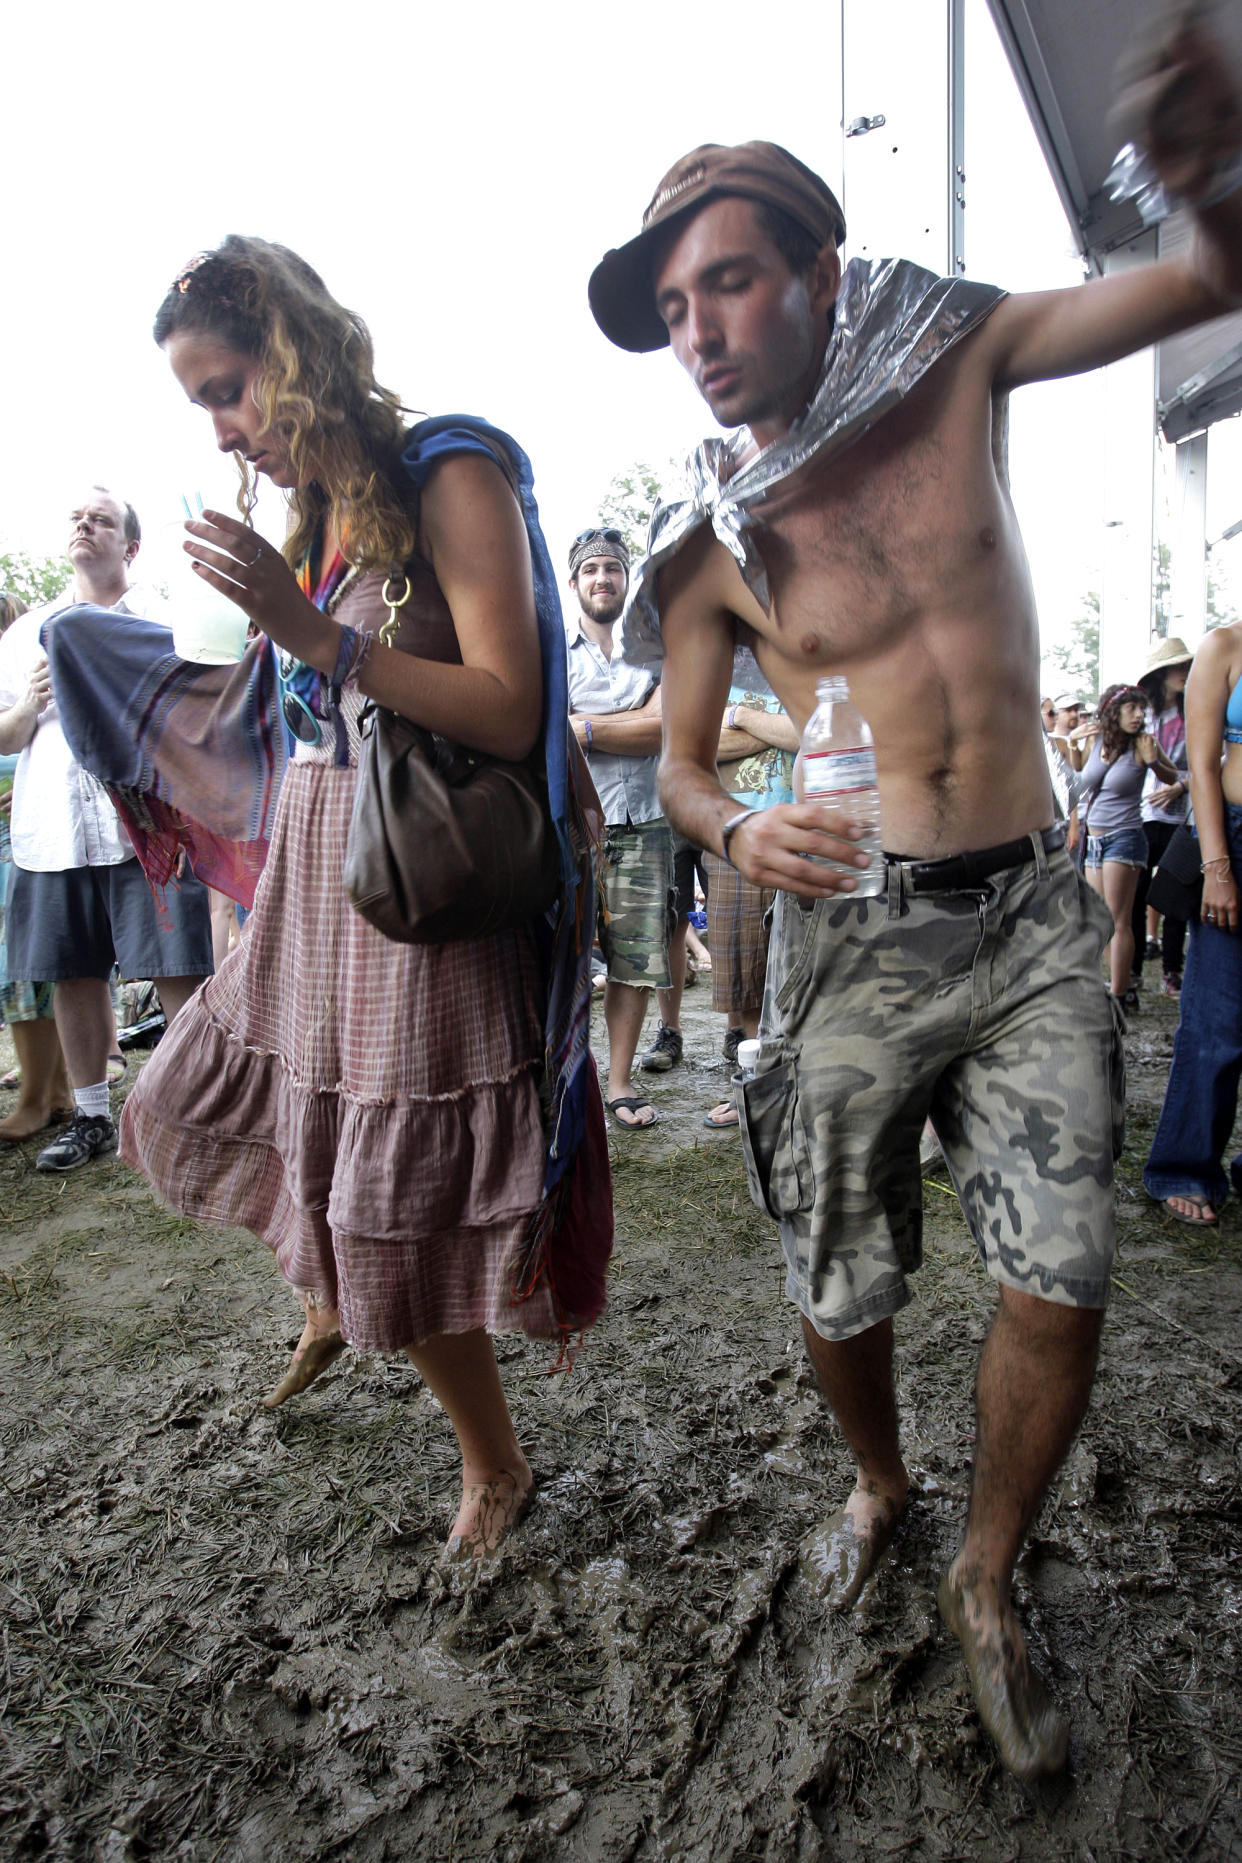 FILE - Georgia Ainsworth, left, of Toronto, and Lee Piazza, right, of Ottawa, dance in the mud during a concert by Iron and Wine at the Bonnaroo music and arts festival in Manchester, Tenn., June 14, 2008. Heavy rains from Hurricane Ida have forced Bonnaroo to cancel as organizer say the waterlogged festival grounds are unsafe for driving or camping. On social media, the festival said on Tuesday, Aug. 31, 2021, that tremendous rainfall over the last 24 hours, remnants of Ida’s powerful winds and rain, have saturated the paths and camping areas. (AP Photo/Mark Humphrey,File)